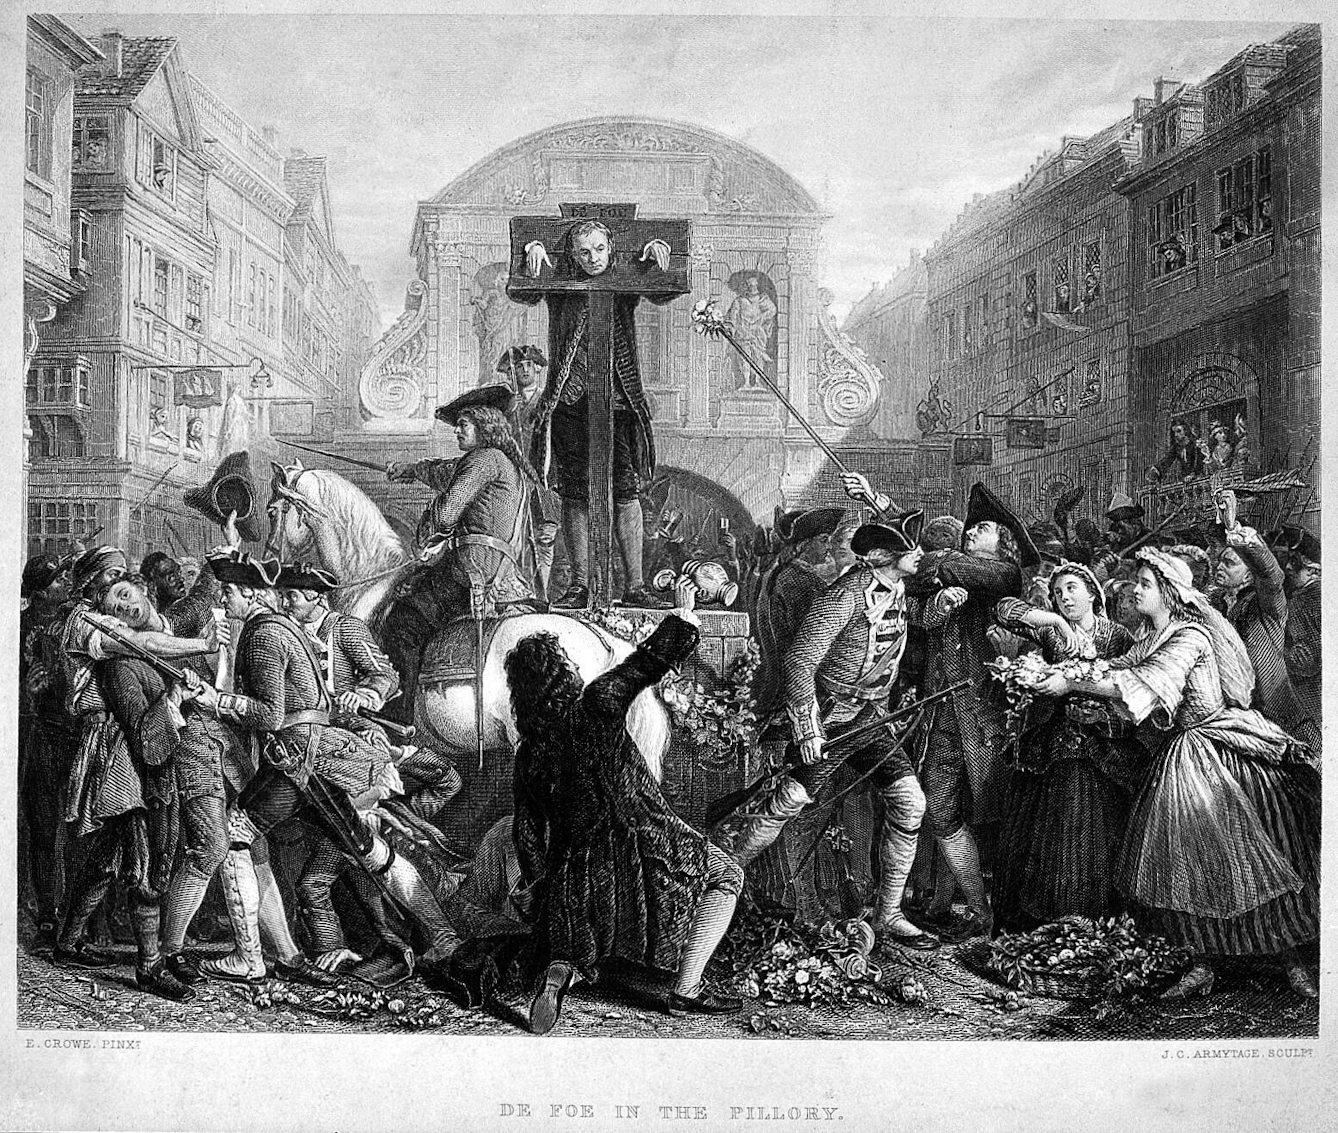 Black and white etching featuring a man with his head and hands trapped in a pillory on a platform. A crowd jeer from below